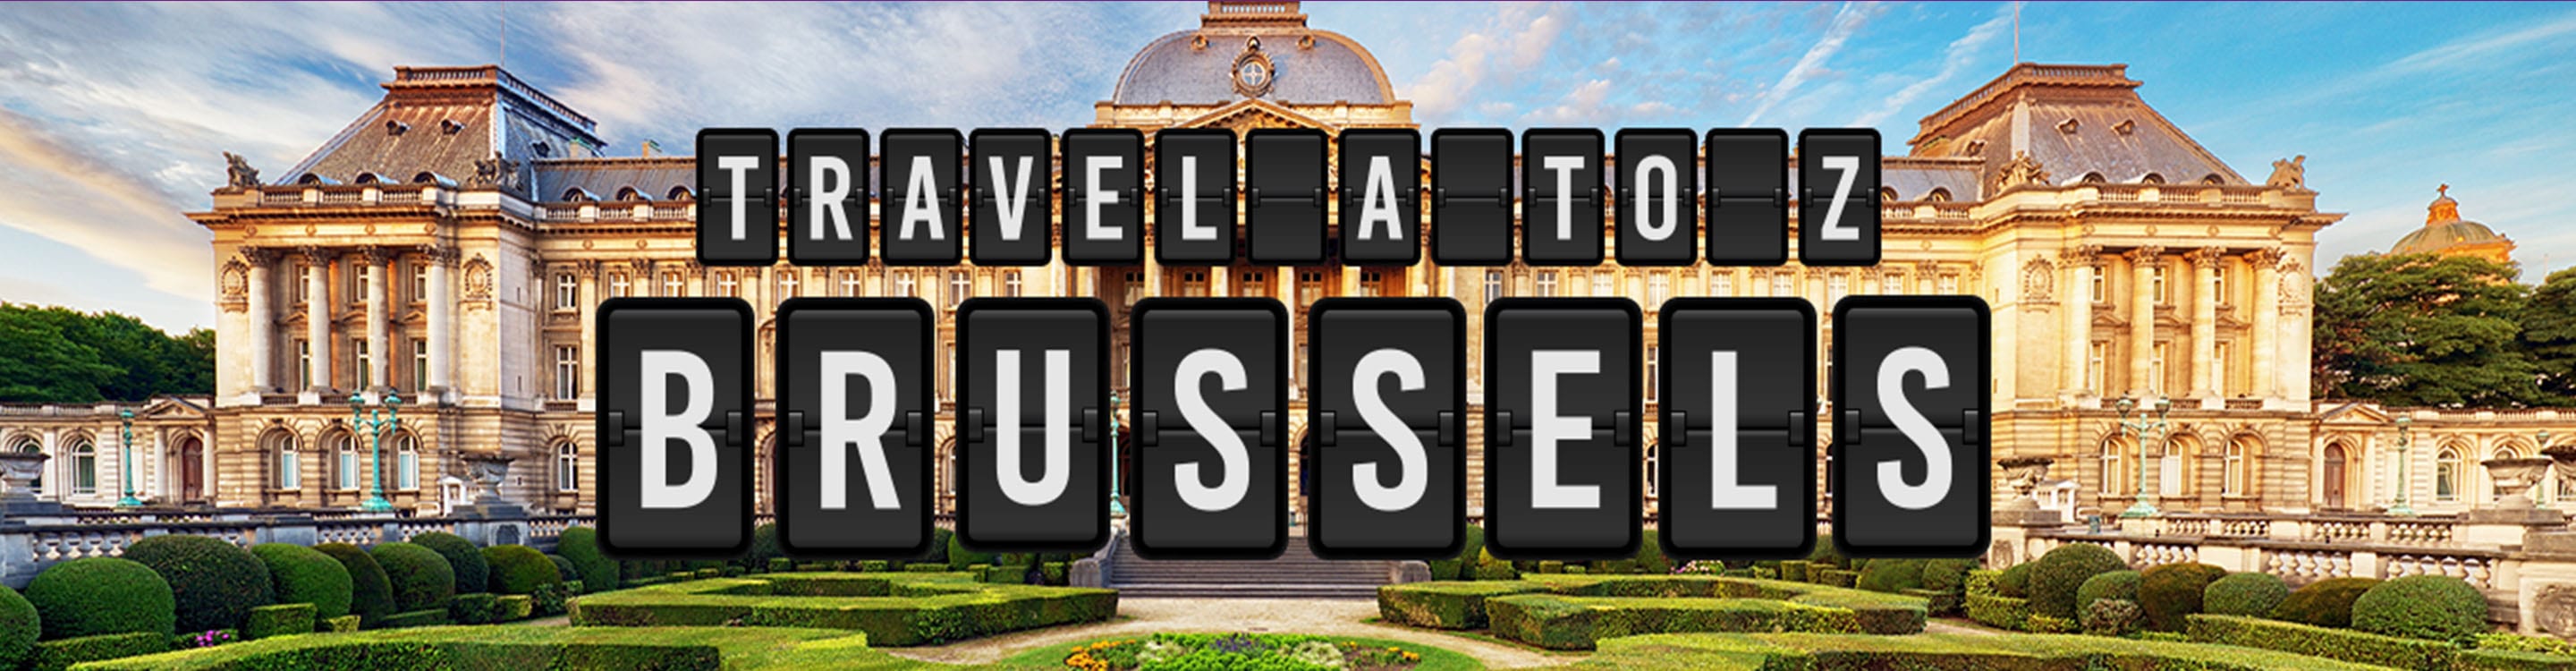 Travel A to Z Brussels